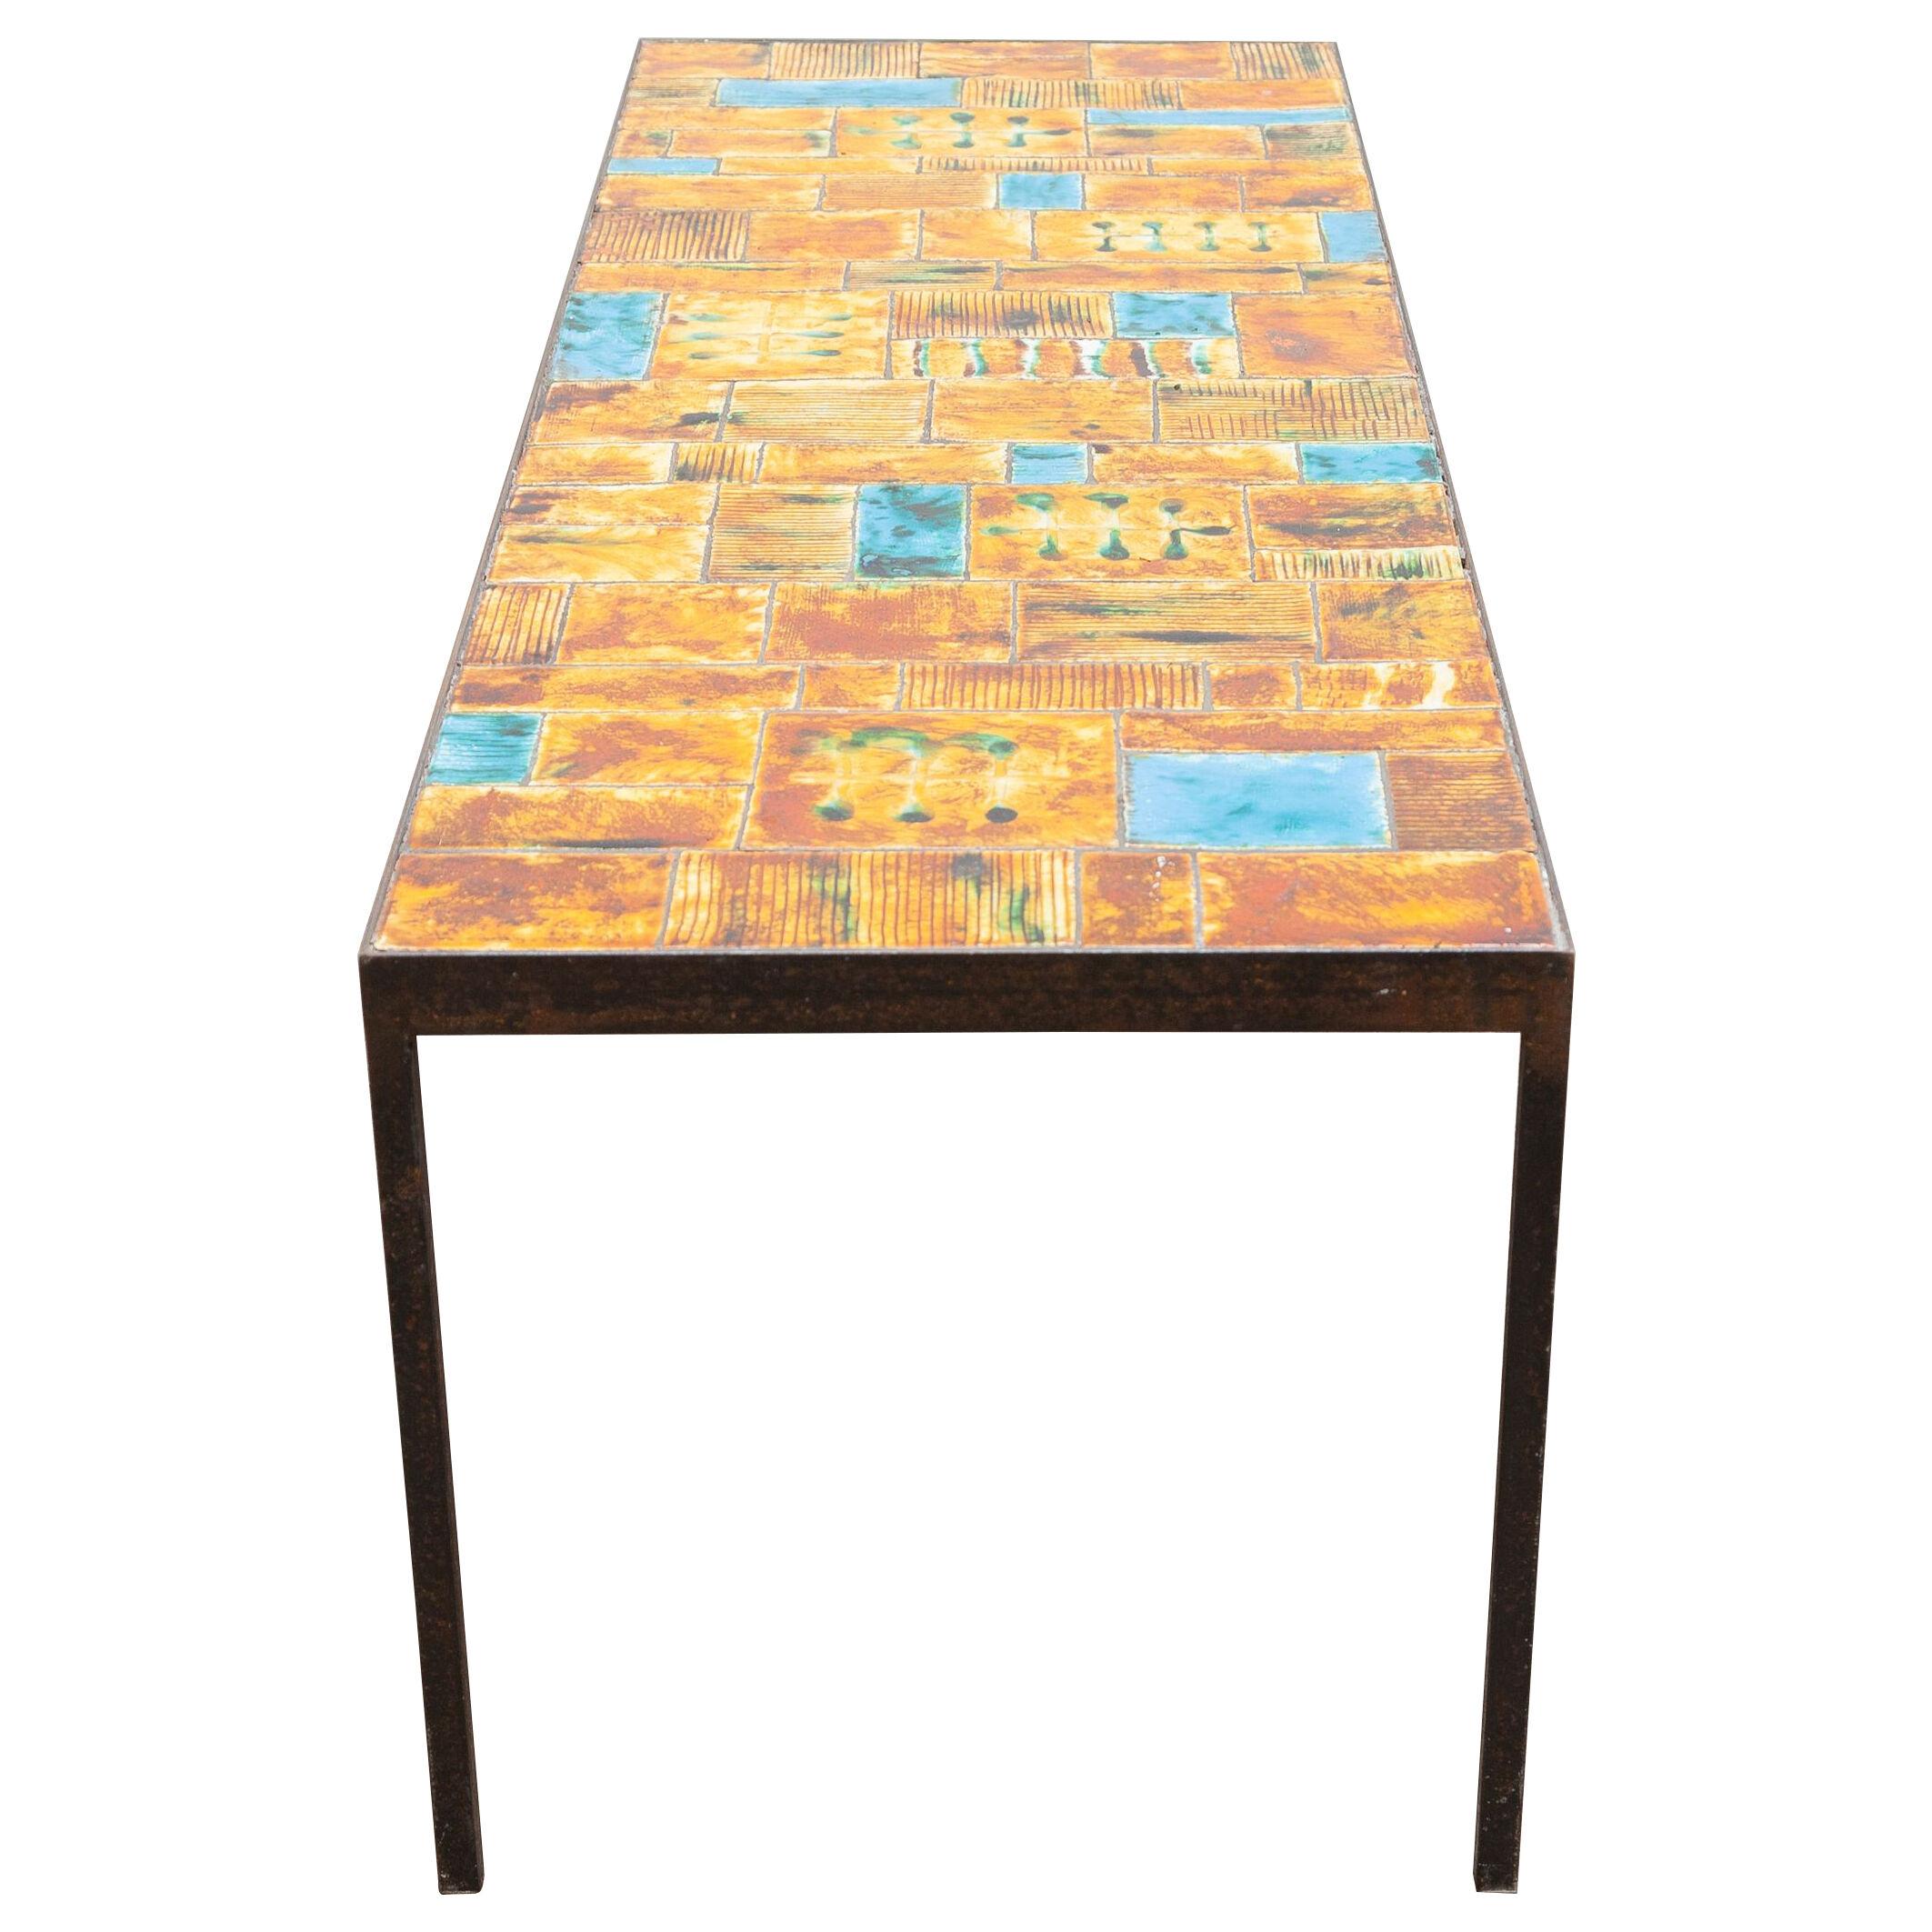 Large Multi Colored Tile Coffee Table Designed by Vallauris, France, 1960s